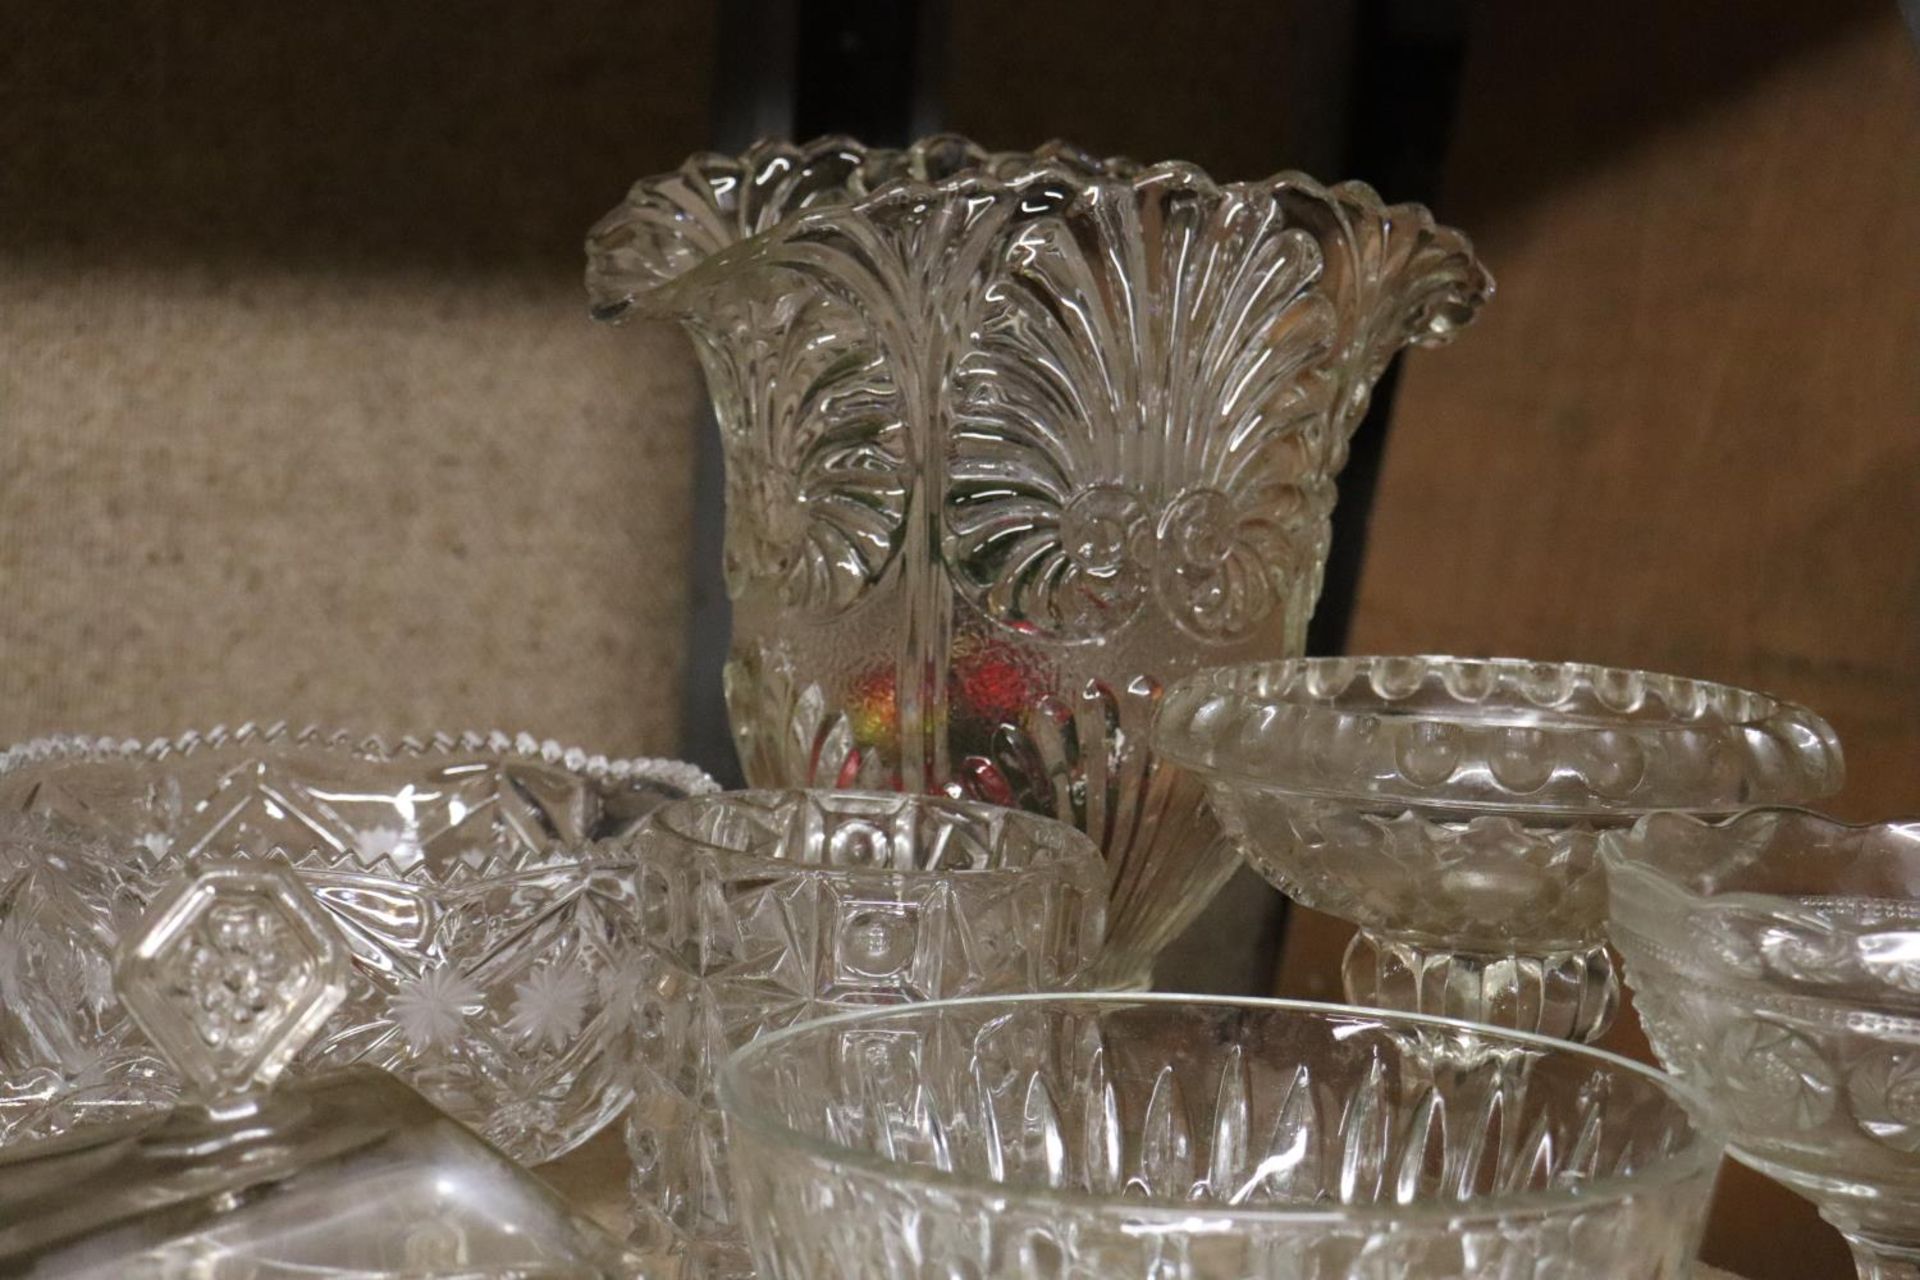 A QUANTITY OF GLASSWARE TO INCLUDE A LARGE VASE, BOWLS, FOOTED BOWLS, A CHEESE DISH, ETC - Bild 3 aus 5